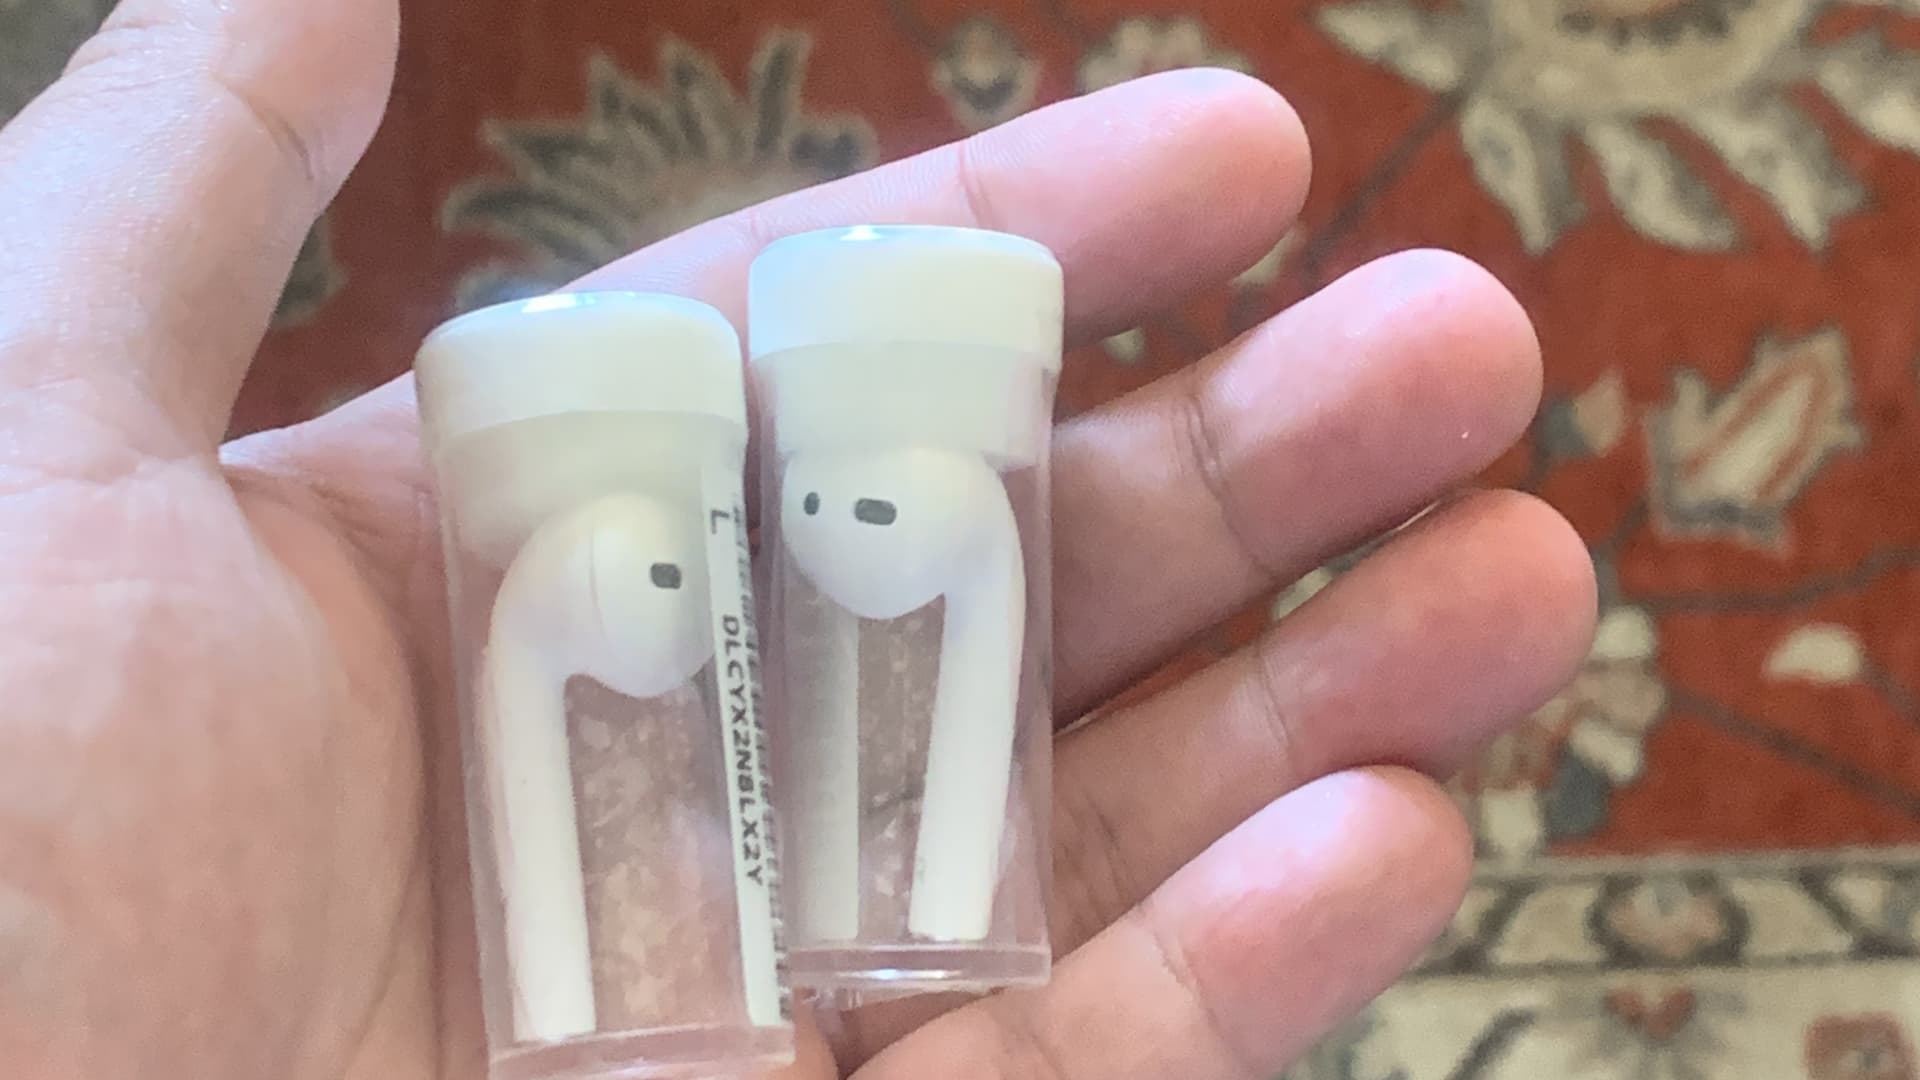 Replacement AirPods from PodSwap